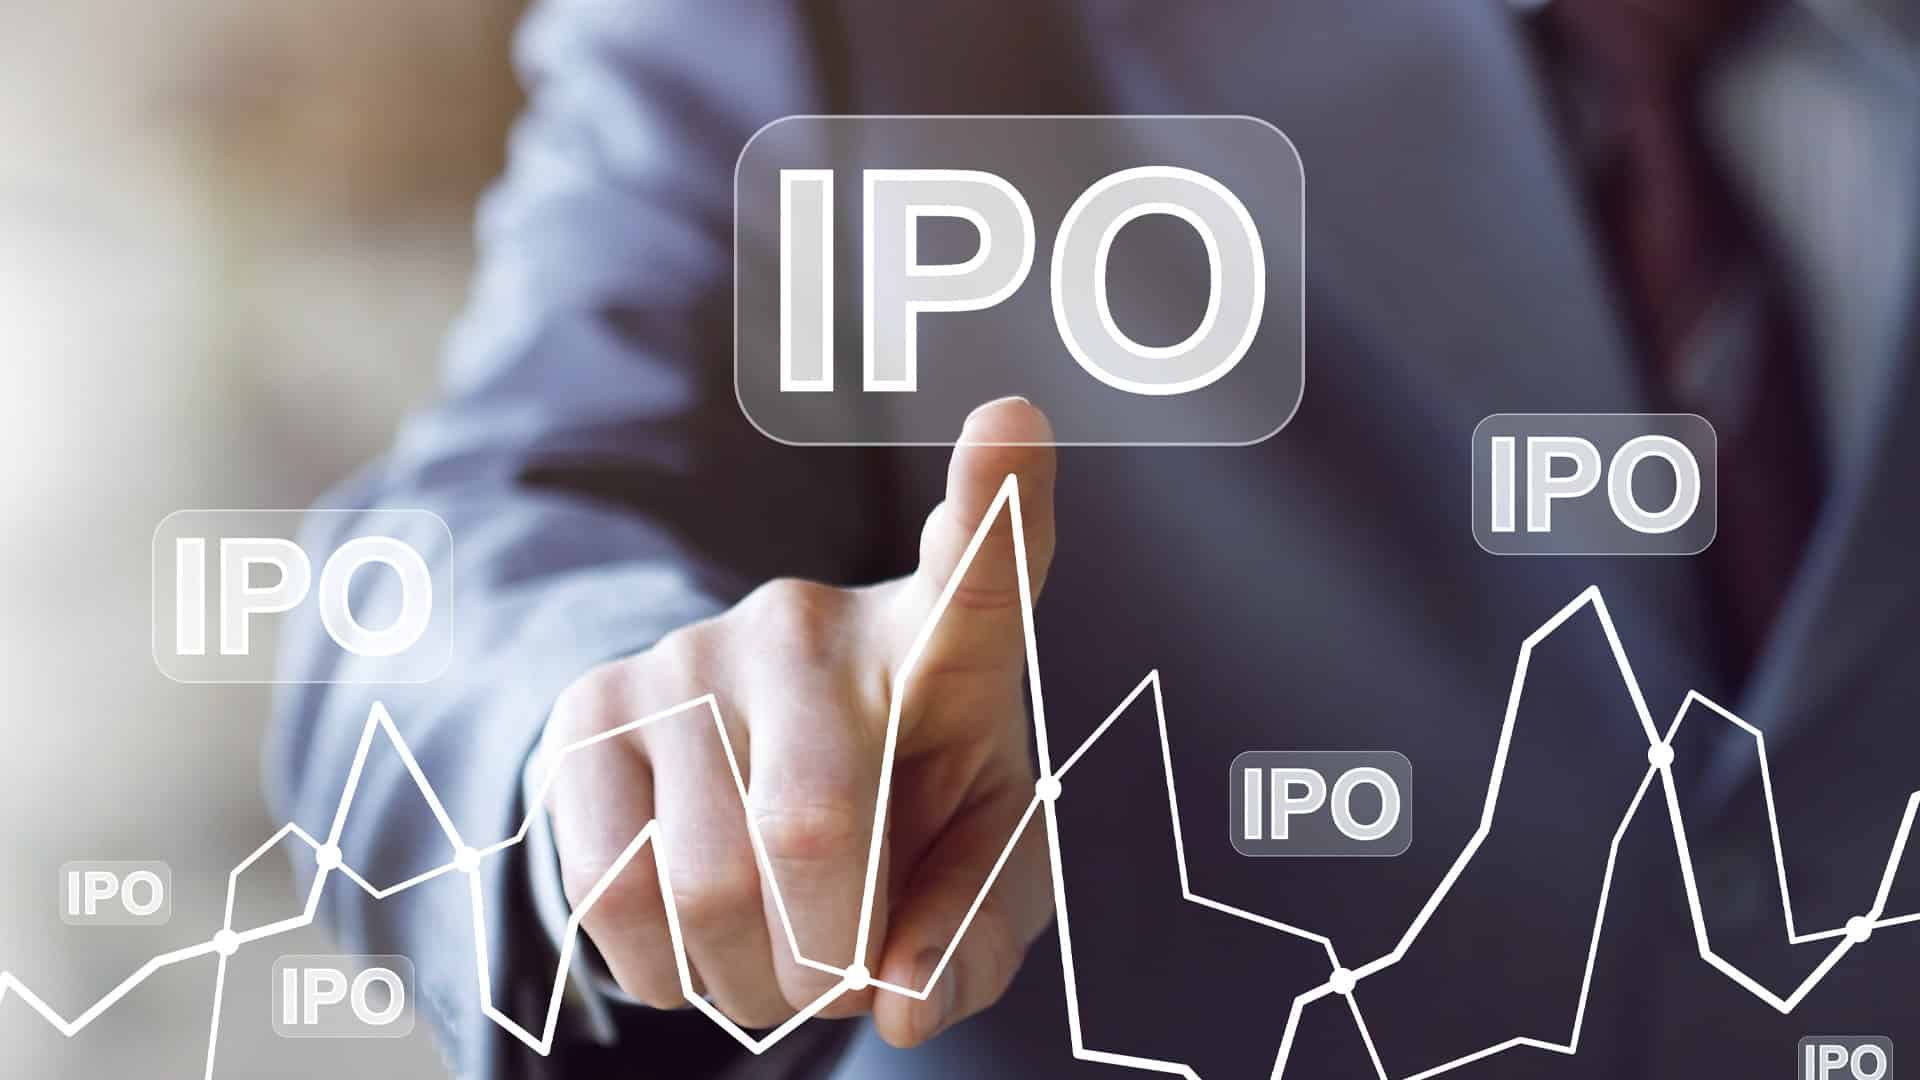 Ahead of IPO, MapmyIndia garners Rs 312 cr from anchor investors